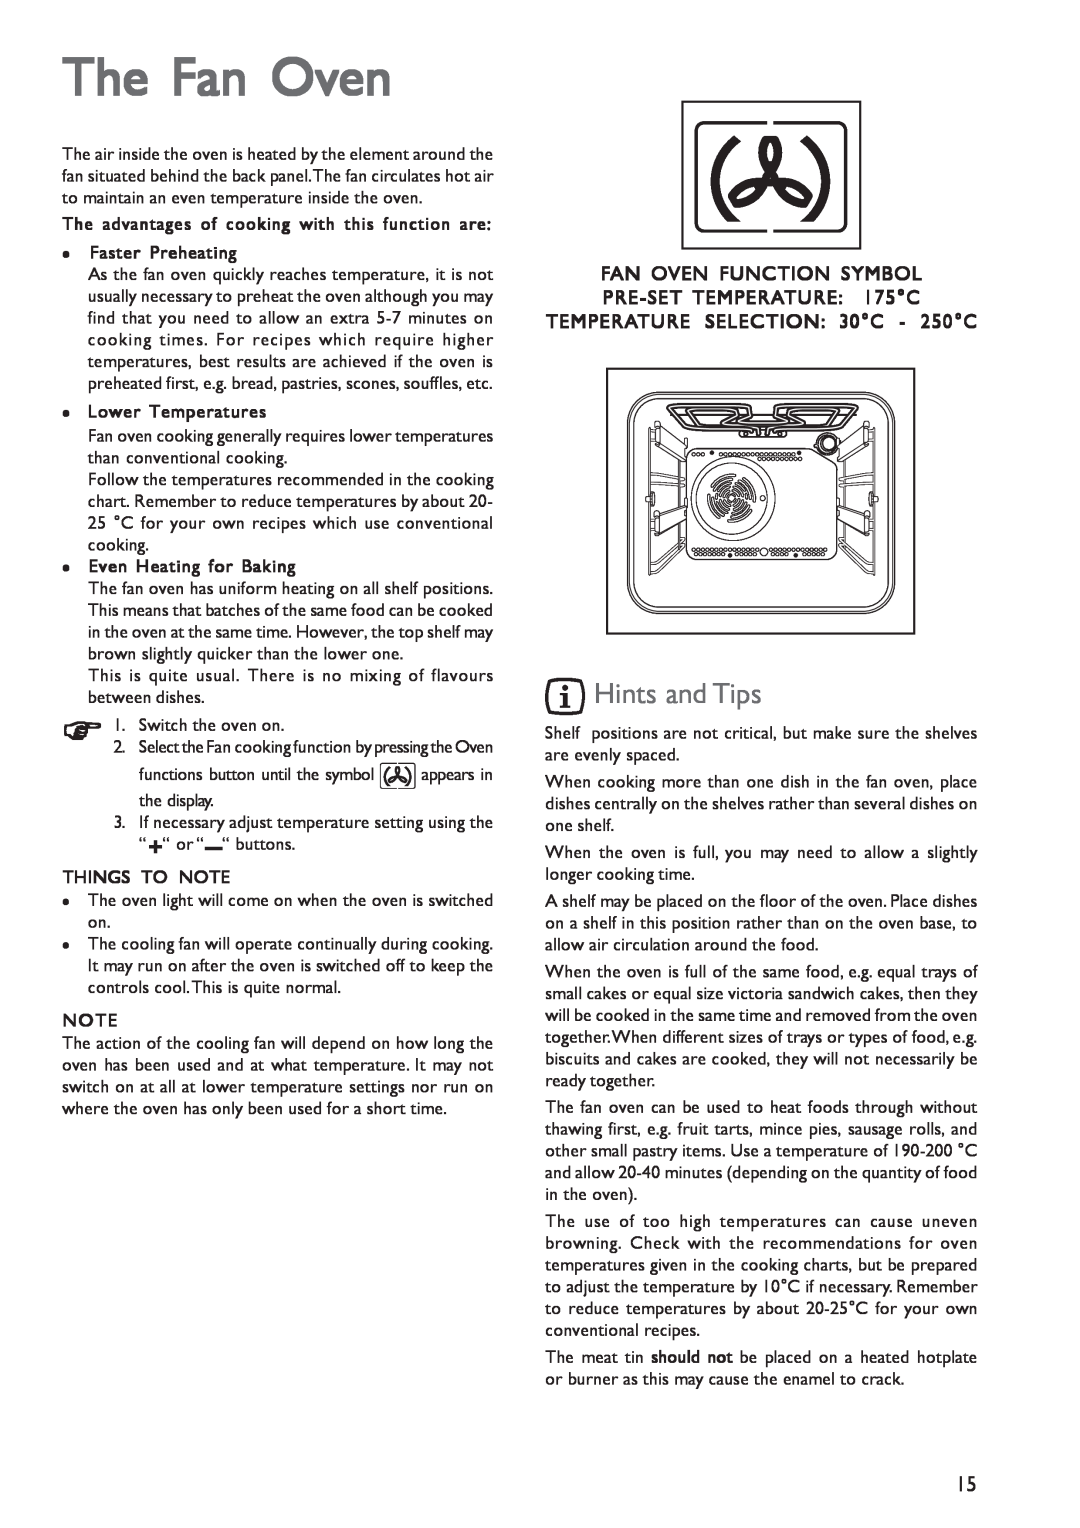 John Lewis JLBIOS603 instruction manual The Fan Oven, Hints and Tips, FAN OVEN FUNCTION SYMBOL PRE-SETTEMPERATURE 175C 